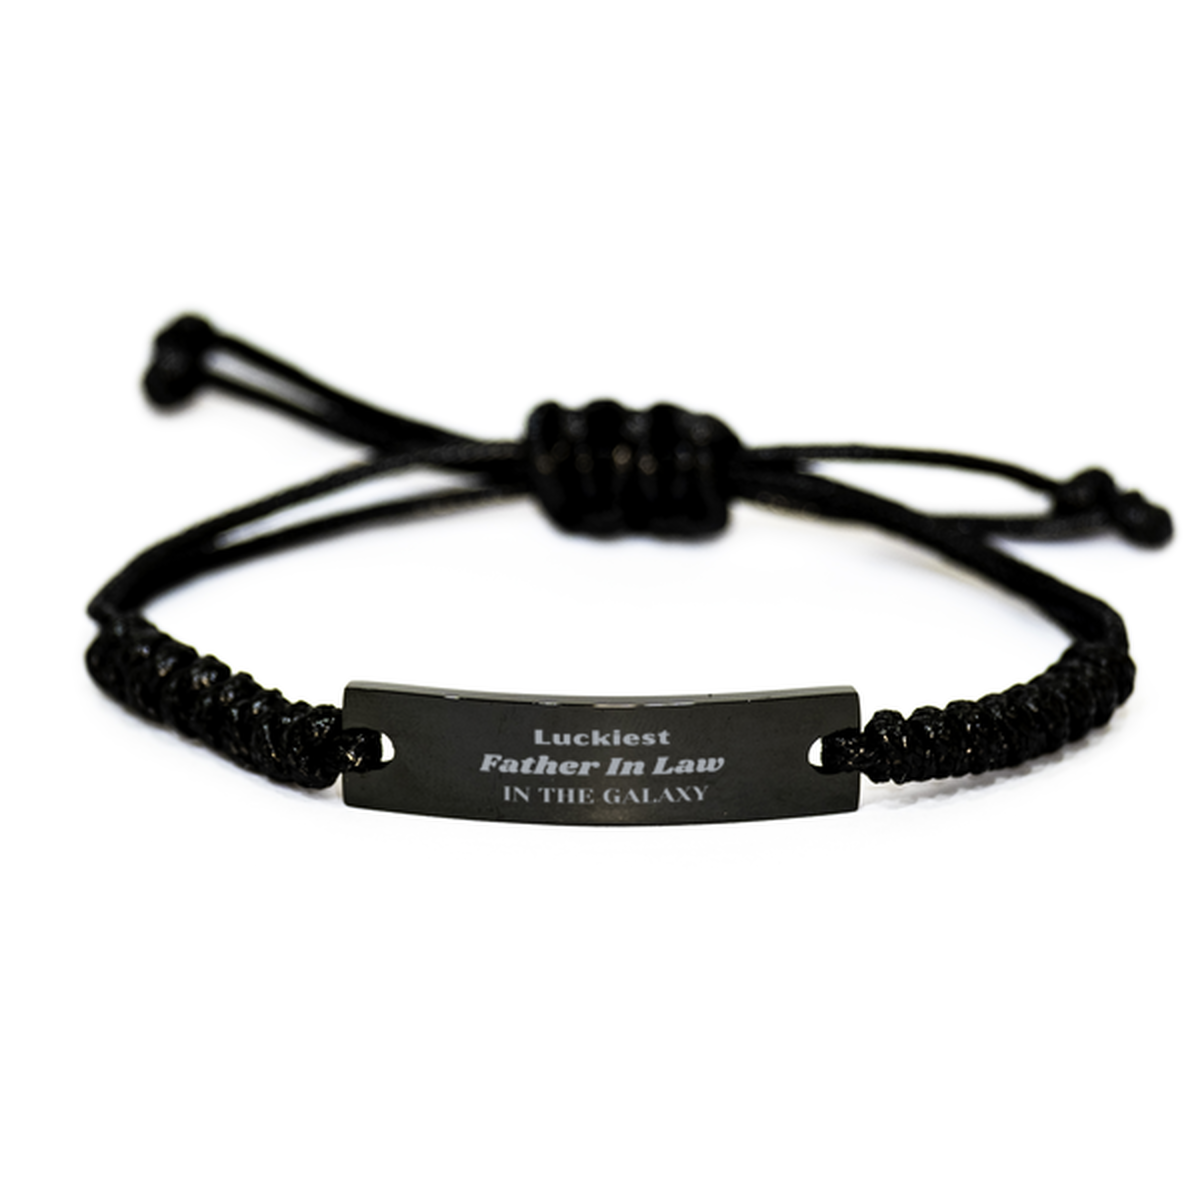 Luckiest Father In Law in the Galaxy, To My Father In Law Engraved Gifts, Christmas Father In Law Black Rope Bracelet Gifts, X-mas Birthday Unique Gifts For Father In Law Men Women